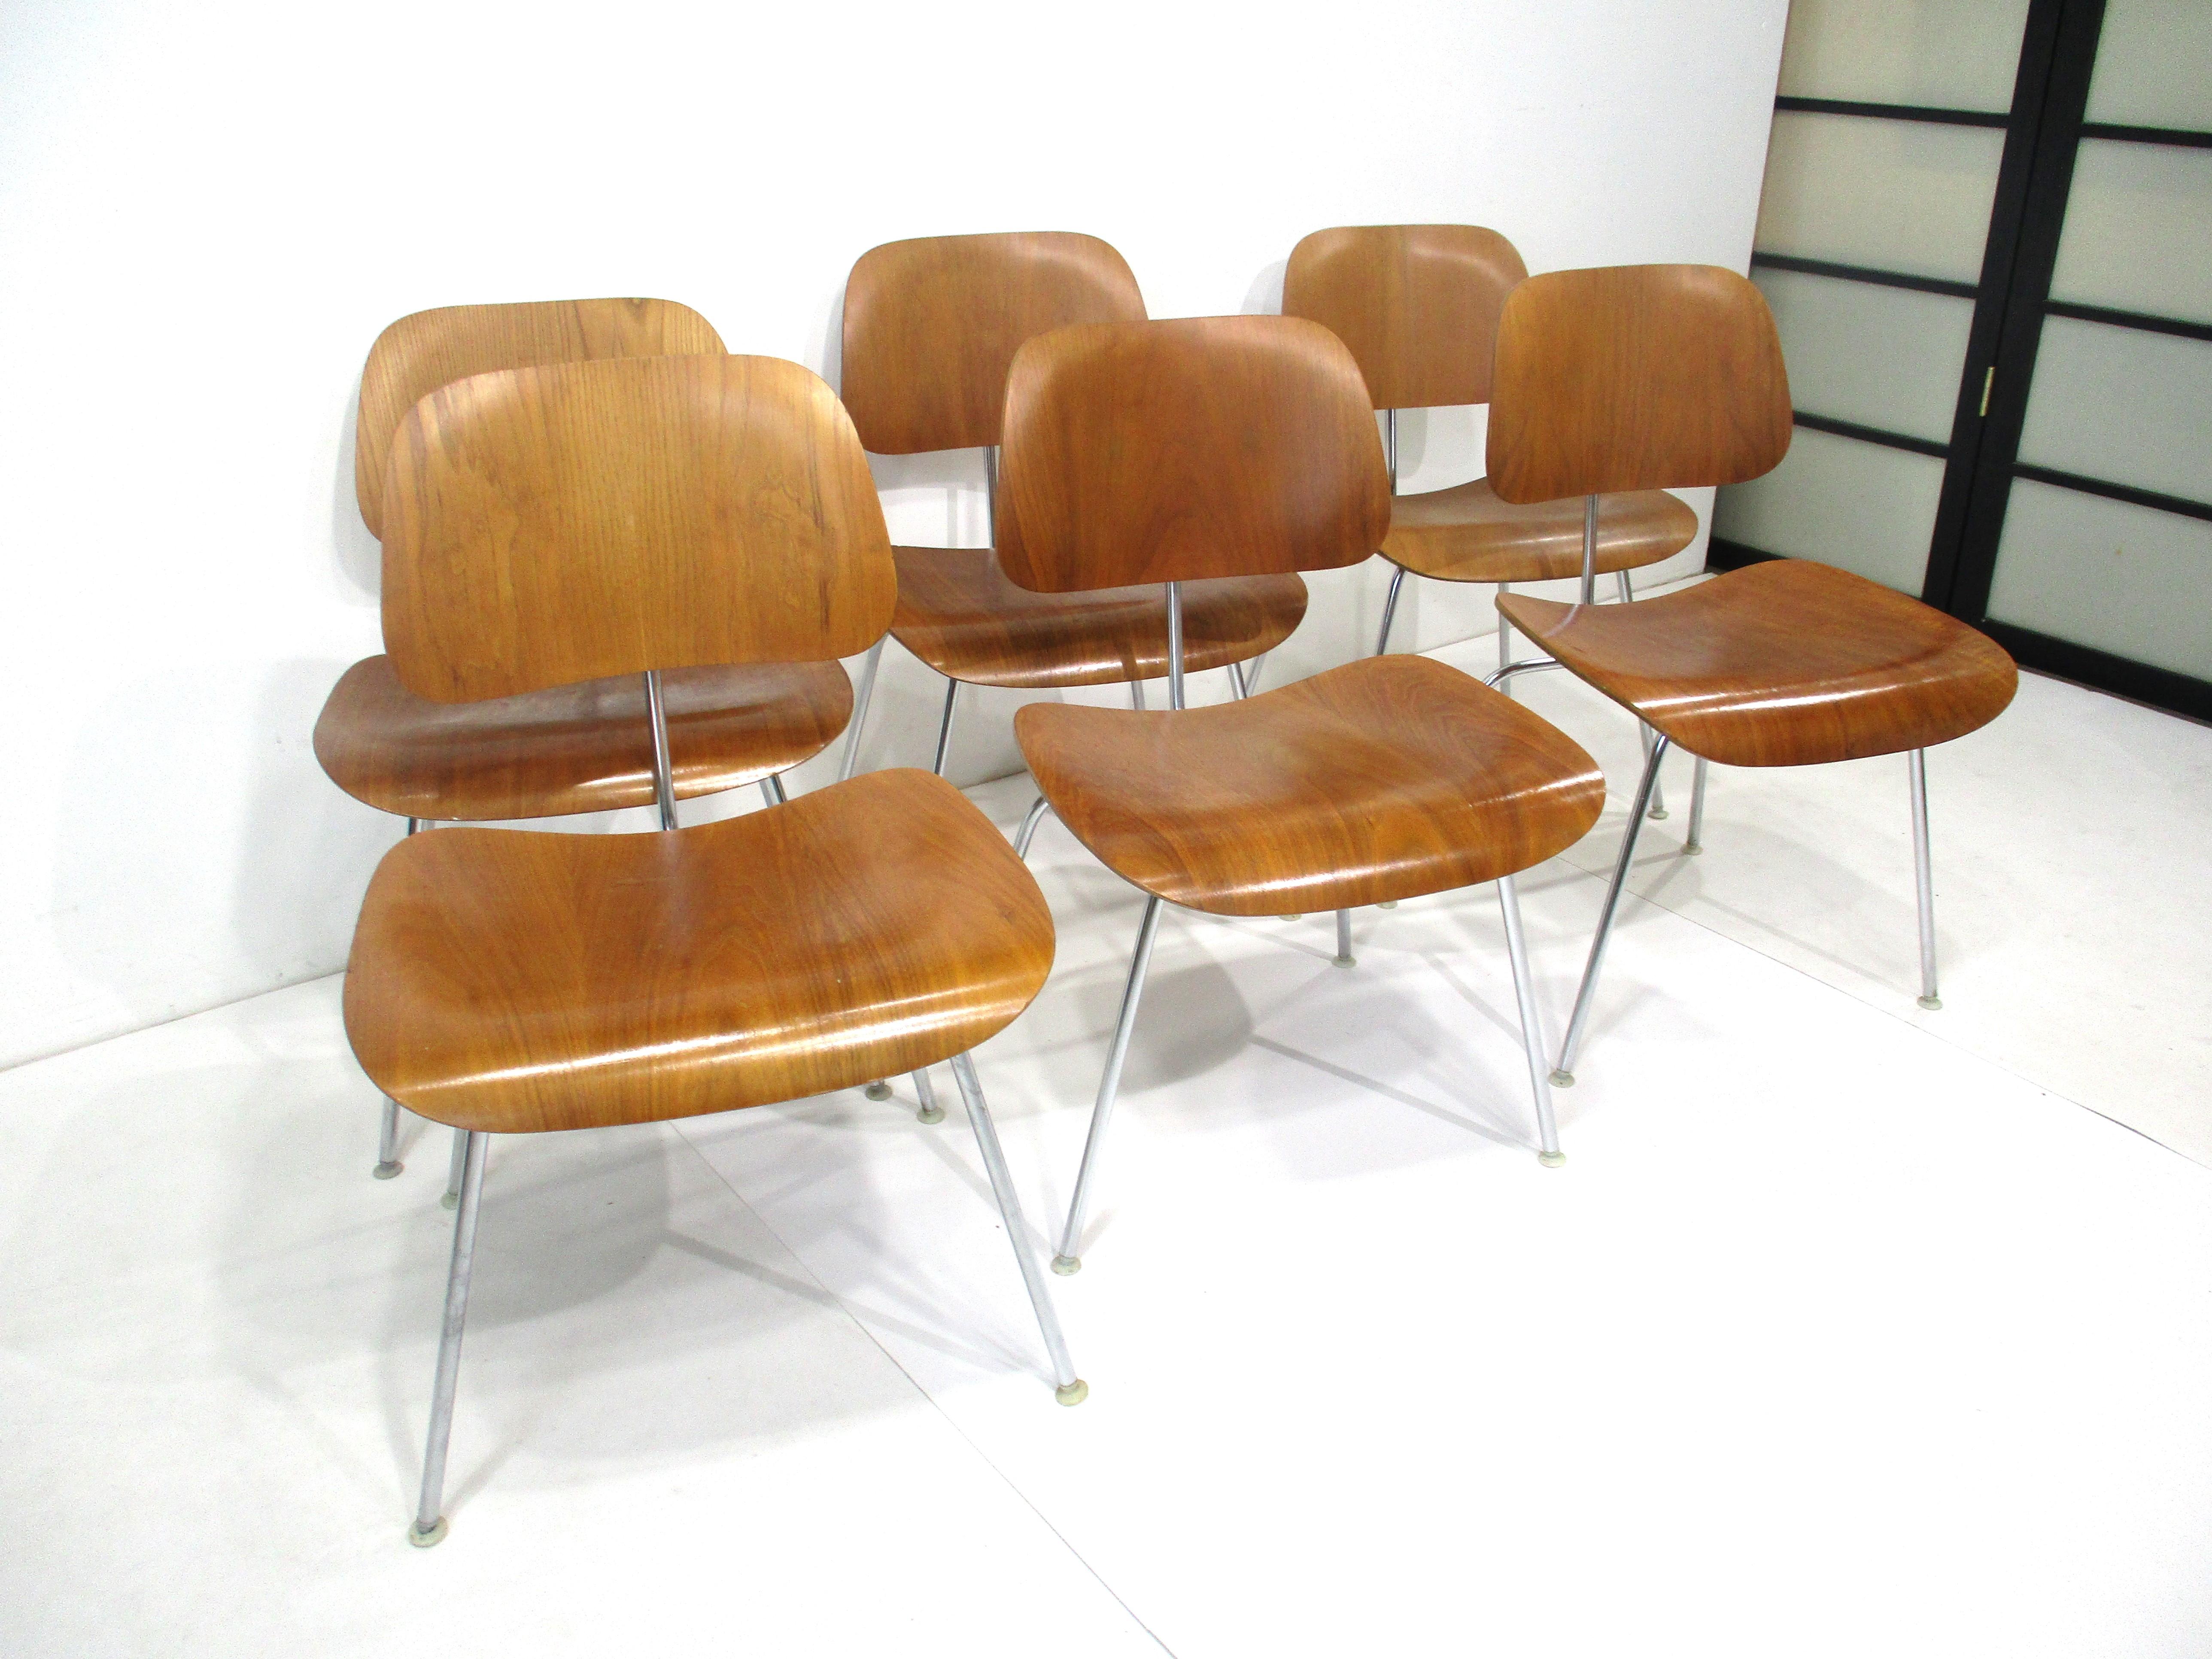 A set of six molded walnut ply DCM dining chairs with chromed metal frames having nylon foot pads to protect your floors . Some still retain the manufactures label to the seat bottom designed by the iconic team of Ray and Charles Eames for the